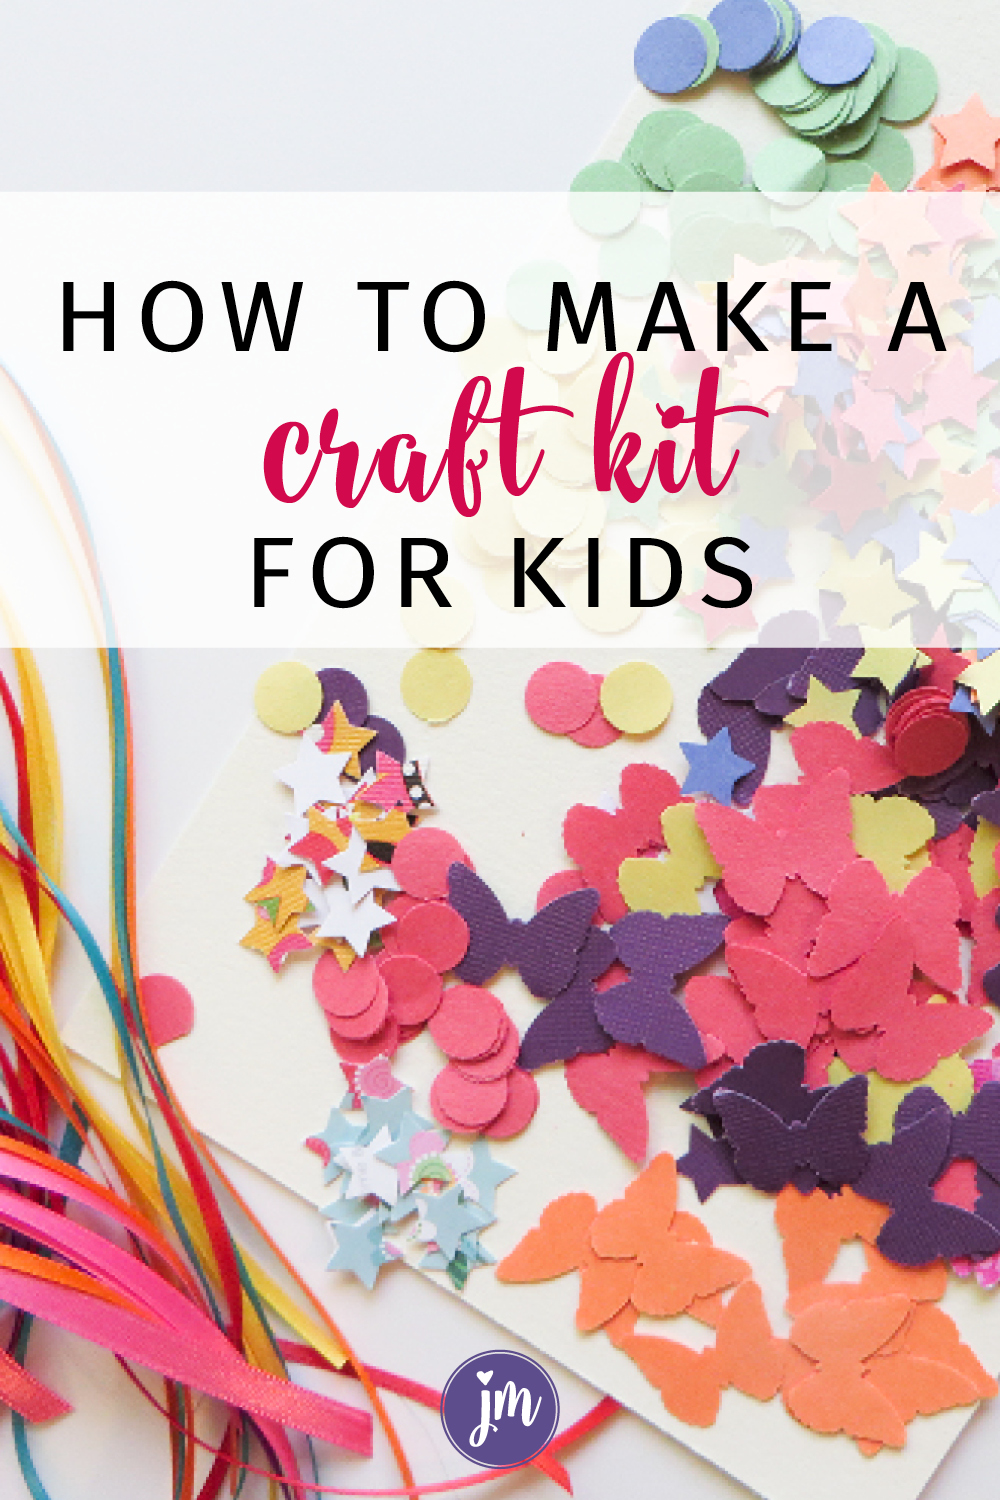 I'm a big fan of craft kits because you can customize them to the individual and DIYing your own is less expensive than buying them premade too! I share how I made a craft kit for my nieces and nephew and give tips for making your own unique gift. #craftsforkids